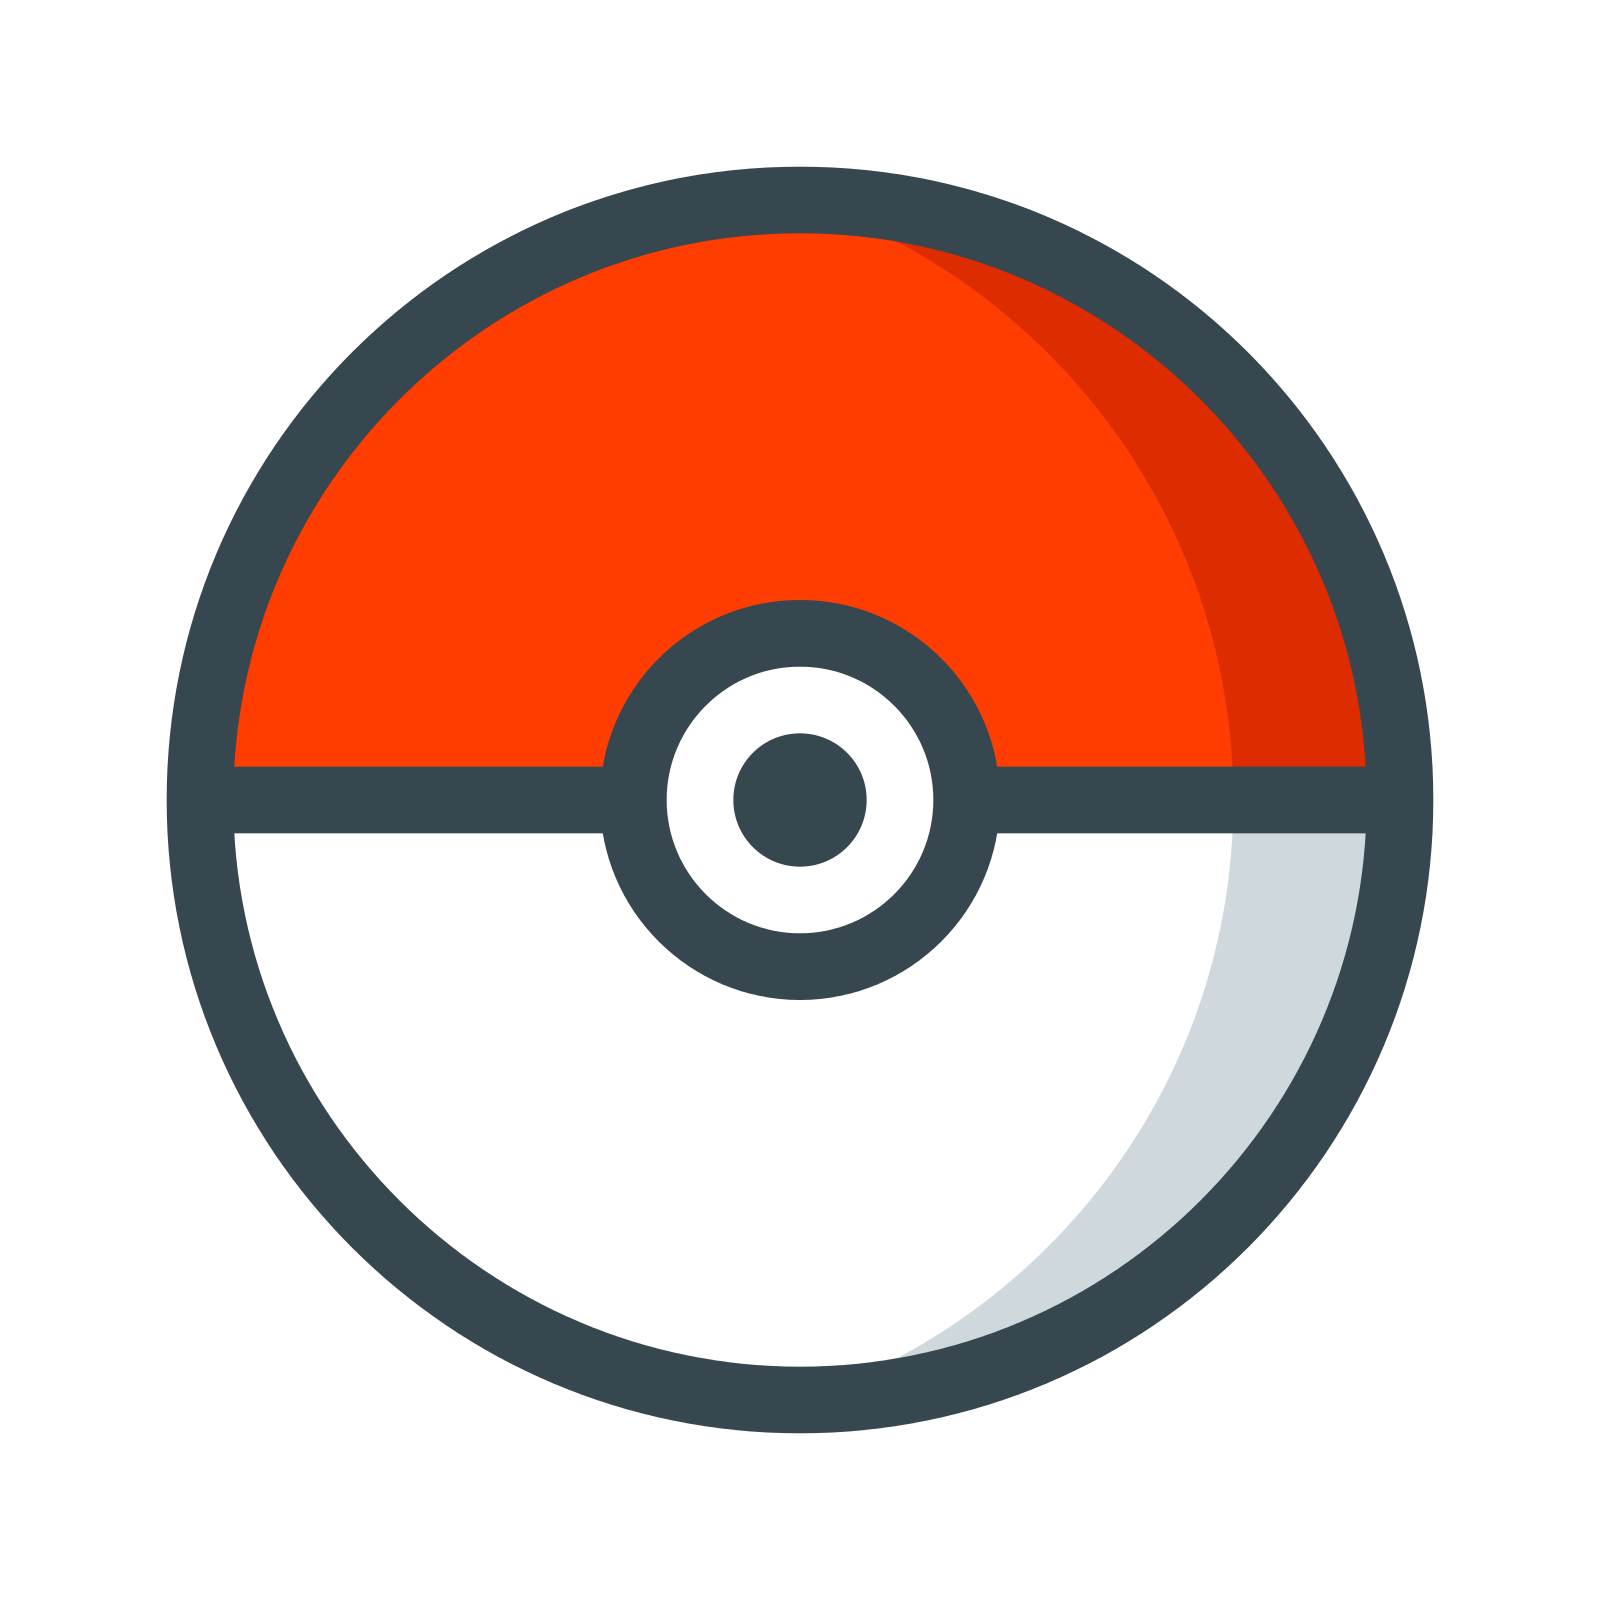 Pokeball Clipart File - Illustration, HD Png Download - 1920x1080